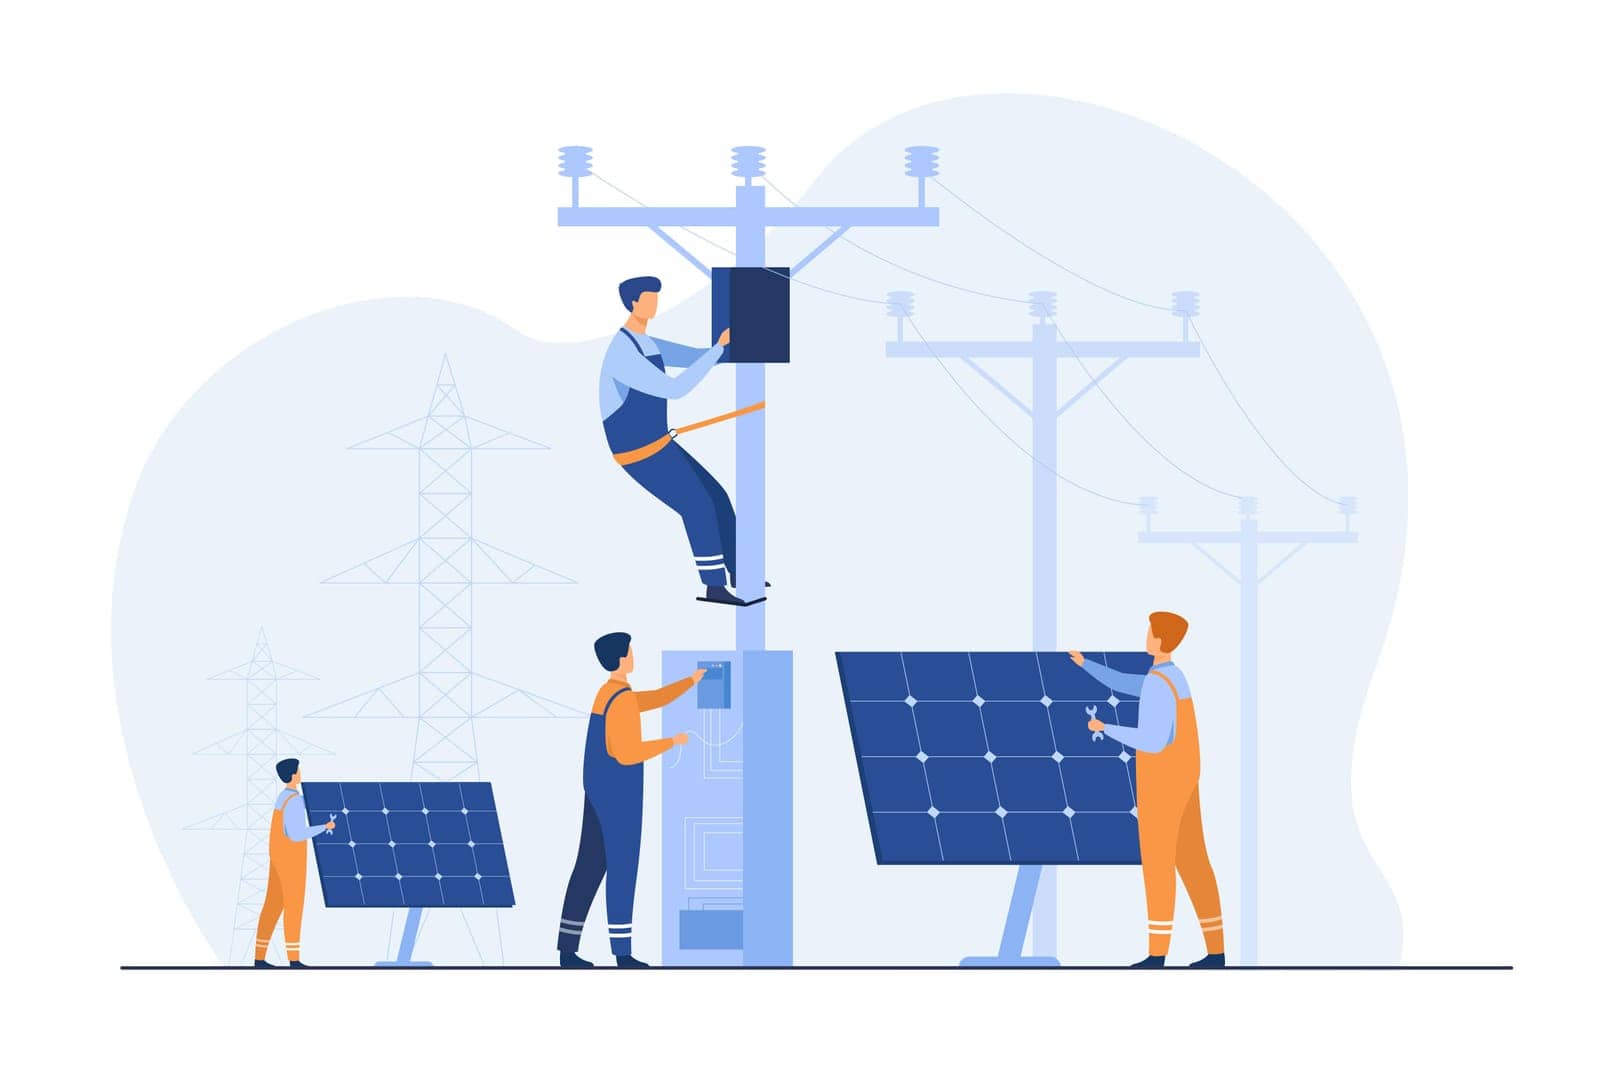 Solar power plant maintenance. Utility workers repairing electric installations, boxes on towers under power lines. For electric network operation, city service, renewable energy topics